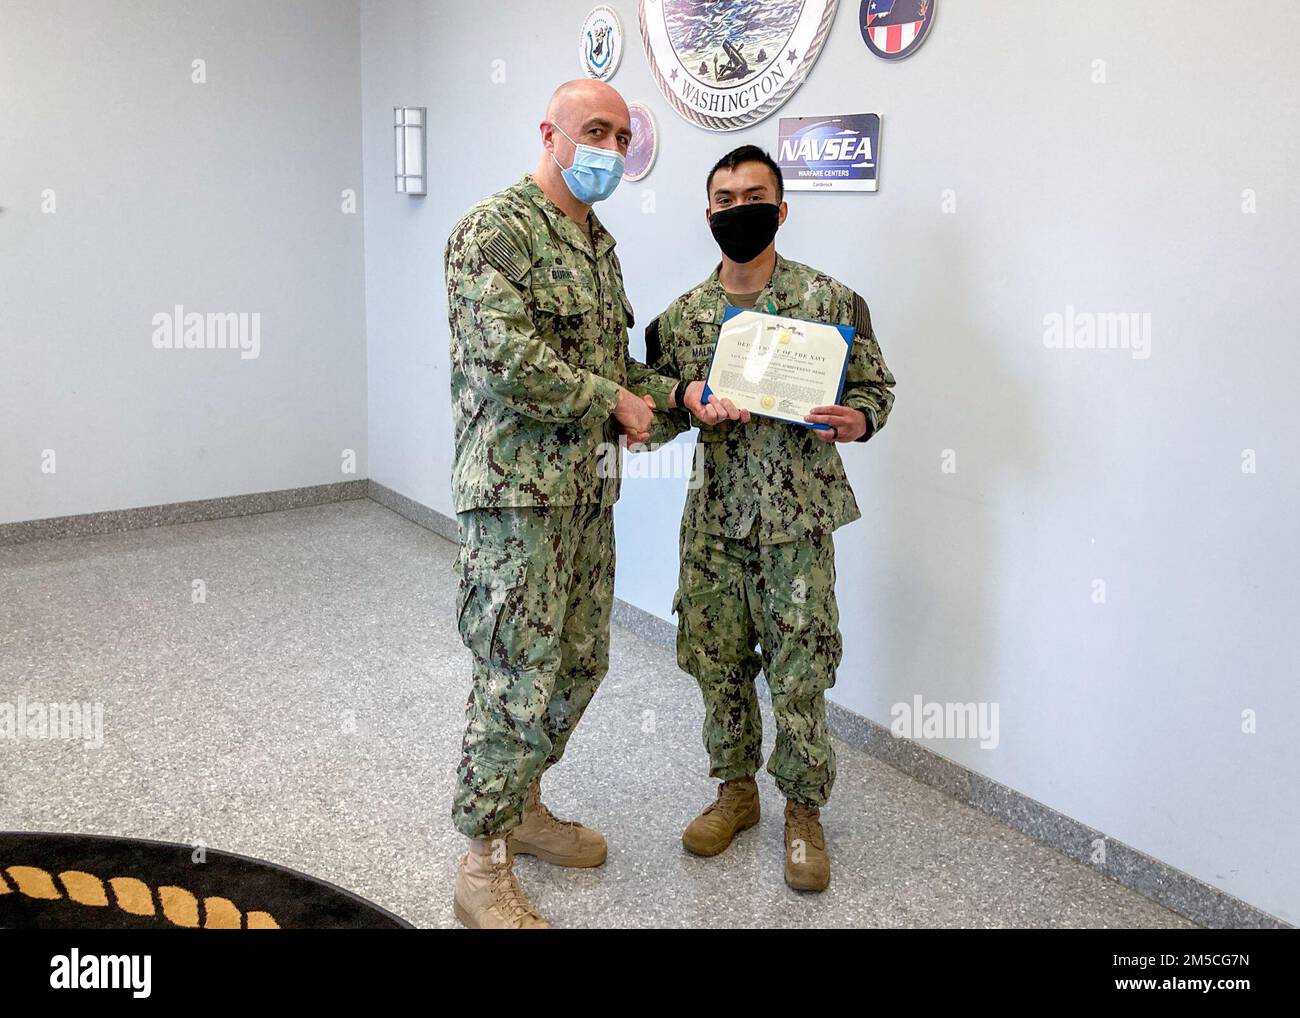 WASHINGTON, DC (March 1, 2022) – Capt. Mark Burns (left), Naval Support Activity Washington commanding officer, presents Religious Program Specialist 2nd Class Arvin Malin (right) with the Navy and Marine Corps achievement medal during an end-of-tour award ceremony held in Malin’s honor. Stock Photo